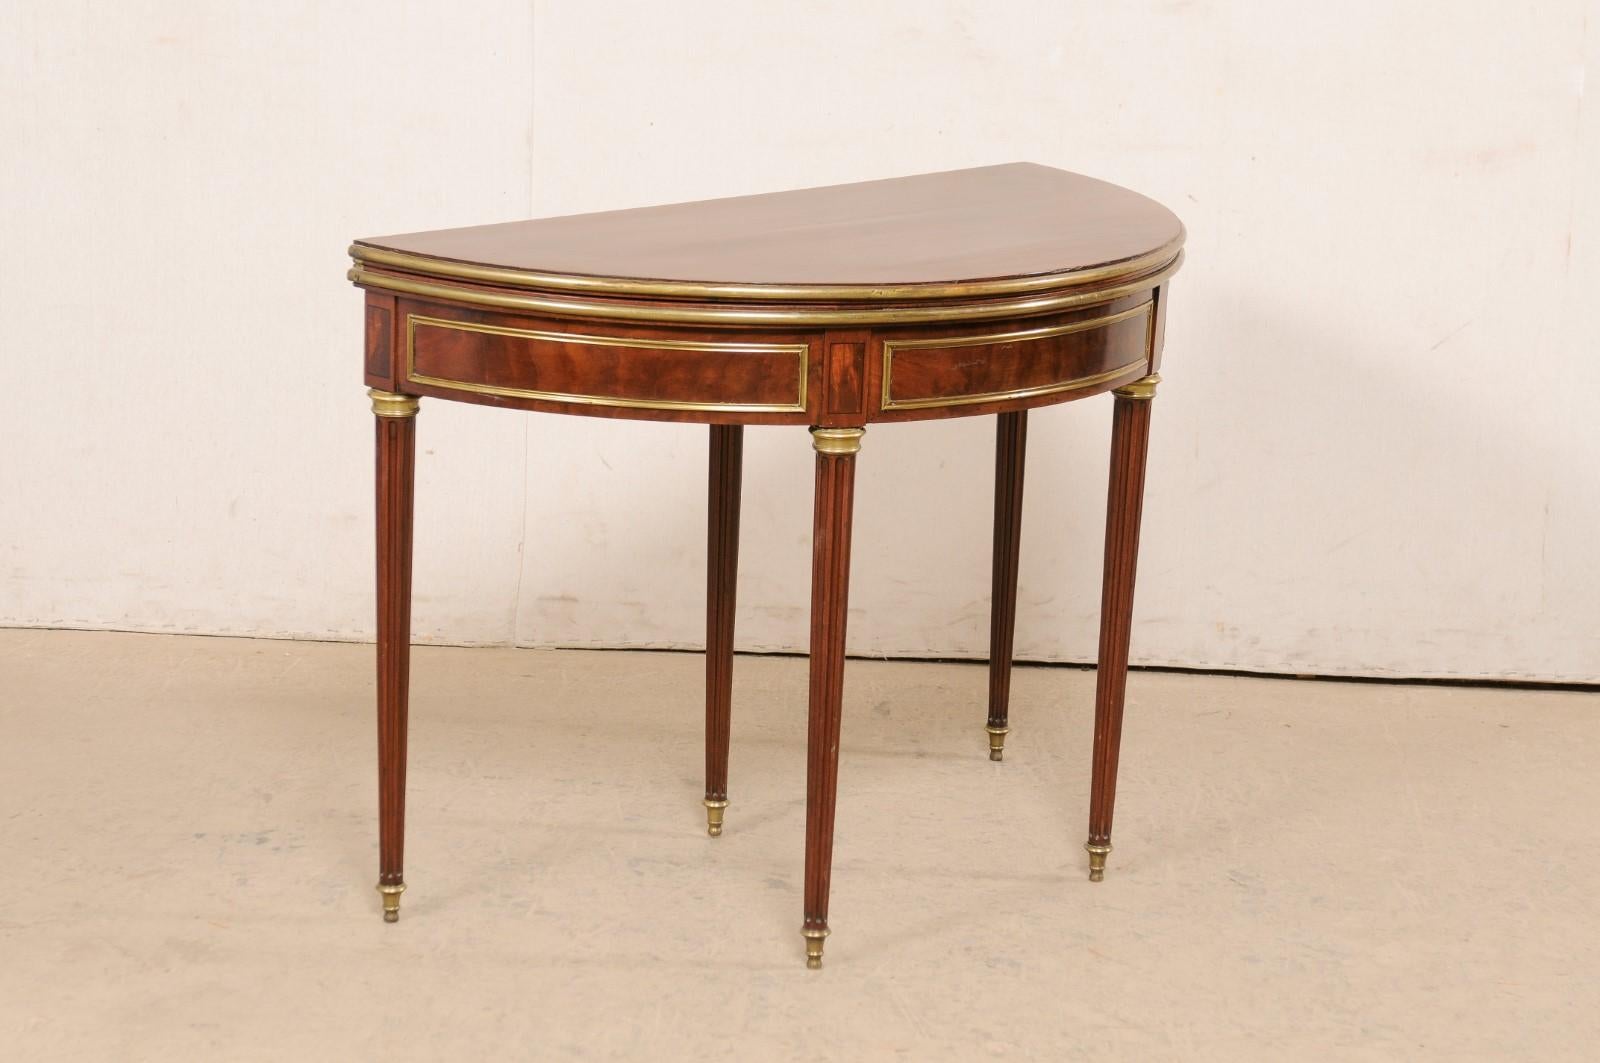  Elegant French Neoclassical Demi-to-round Table W/ Brass Accents, 19th C.  In Good Condition For Sale In Atlanta, GA